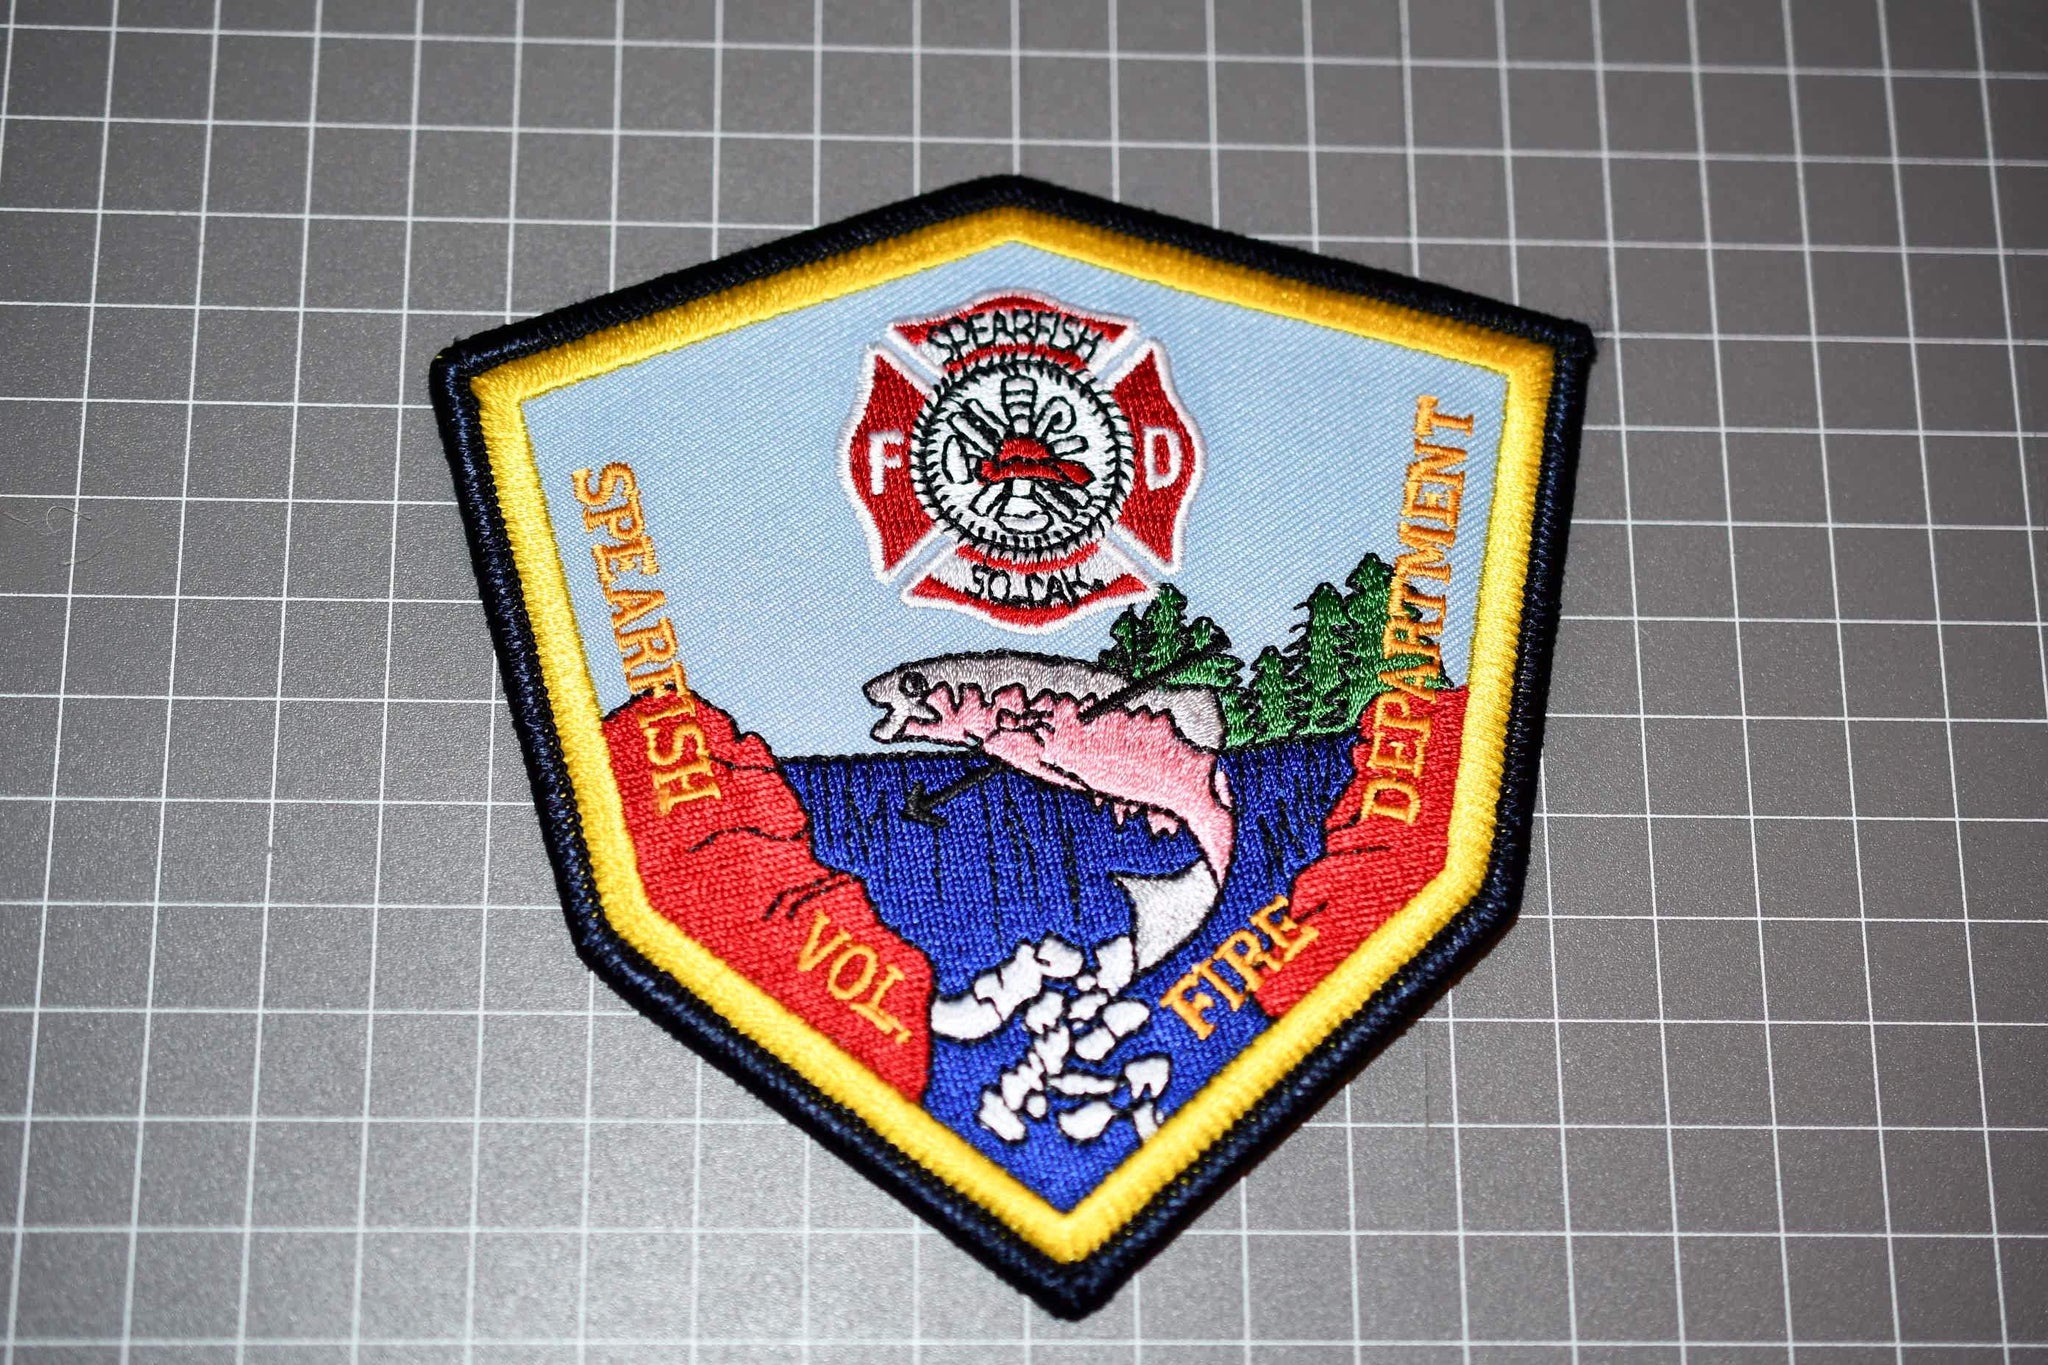 Spearfish Volunteer Fire Department Patch (B19)